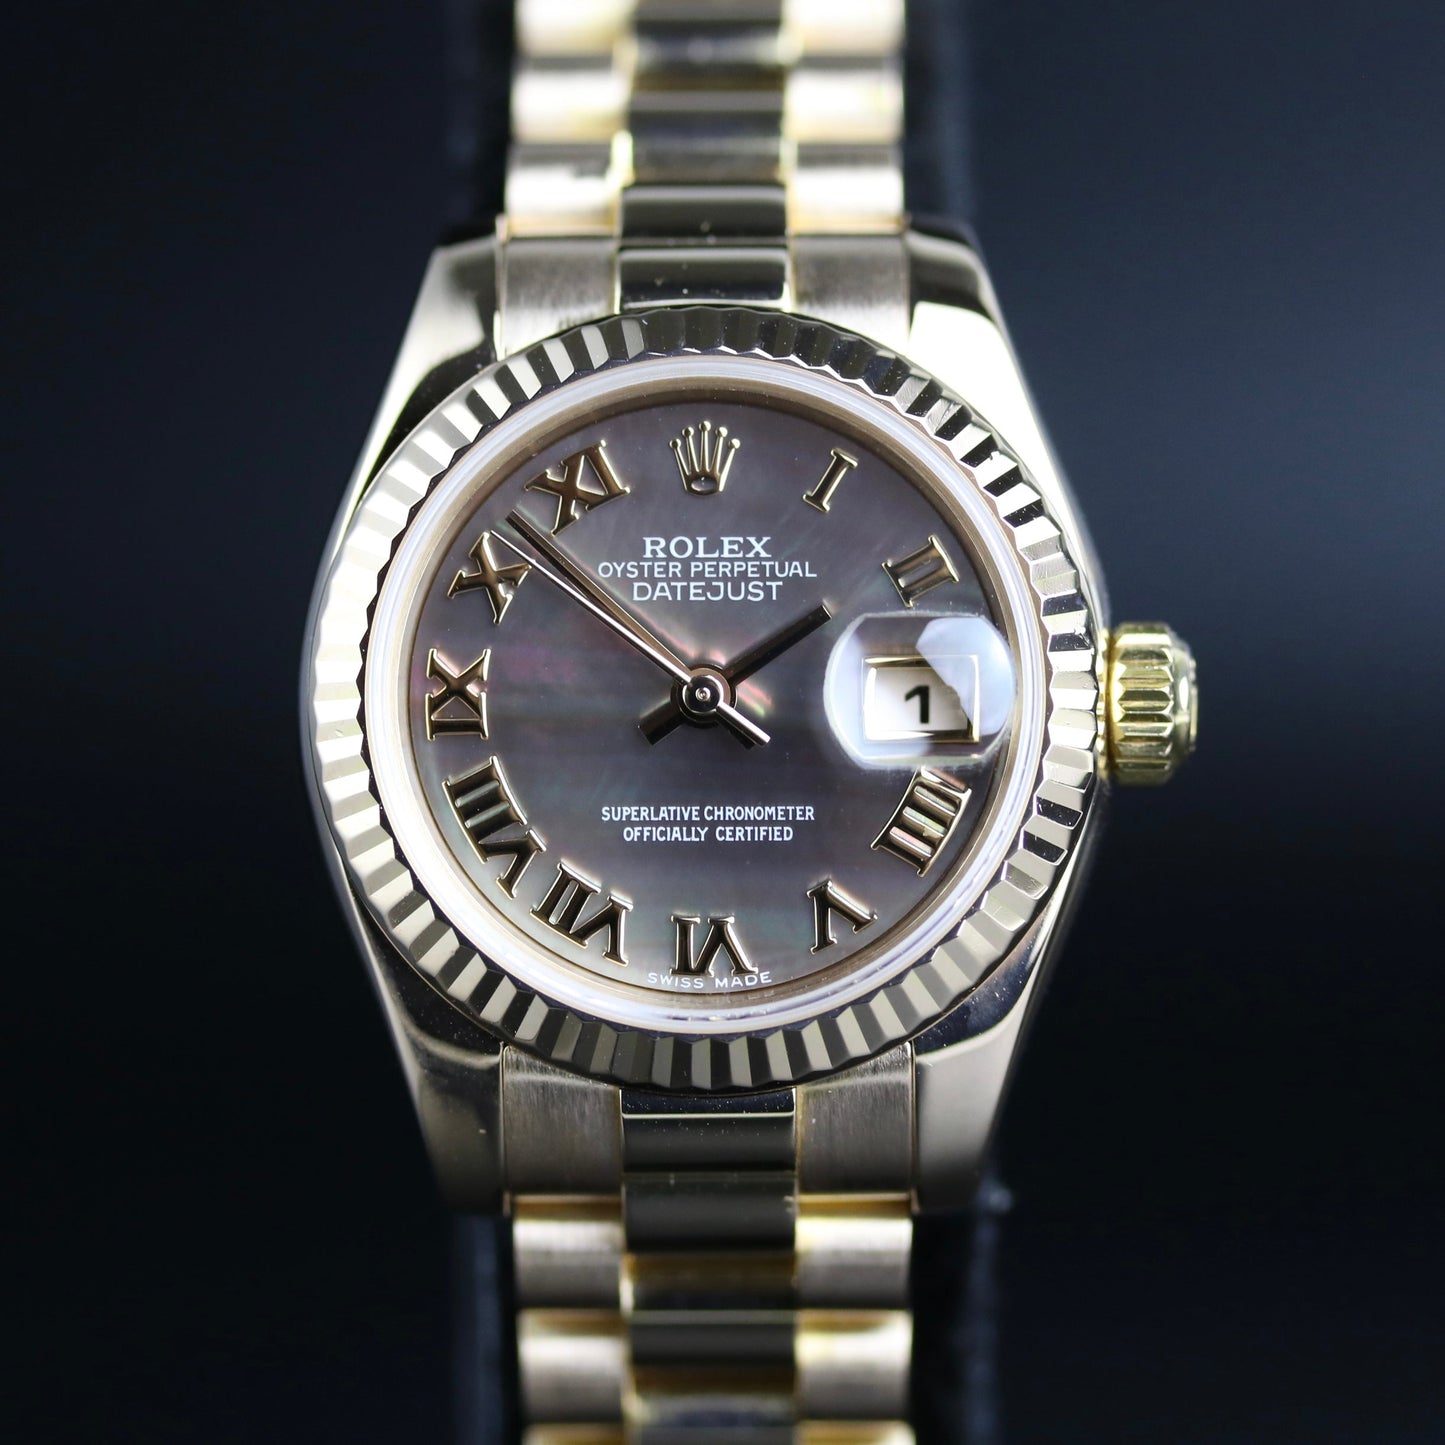 2001 Rolex 179175 Datejust 26mm 18K Rose Gold Black MOP Dial with Box & Papers